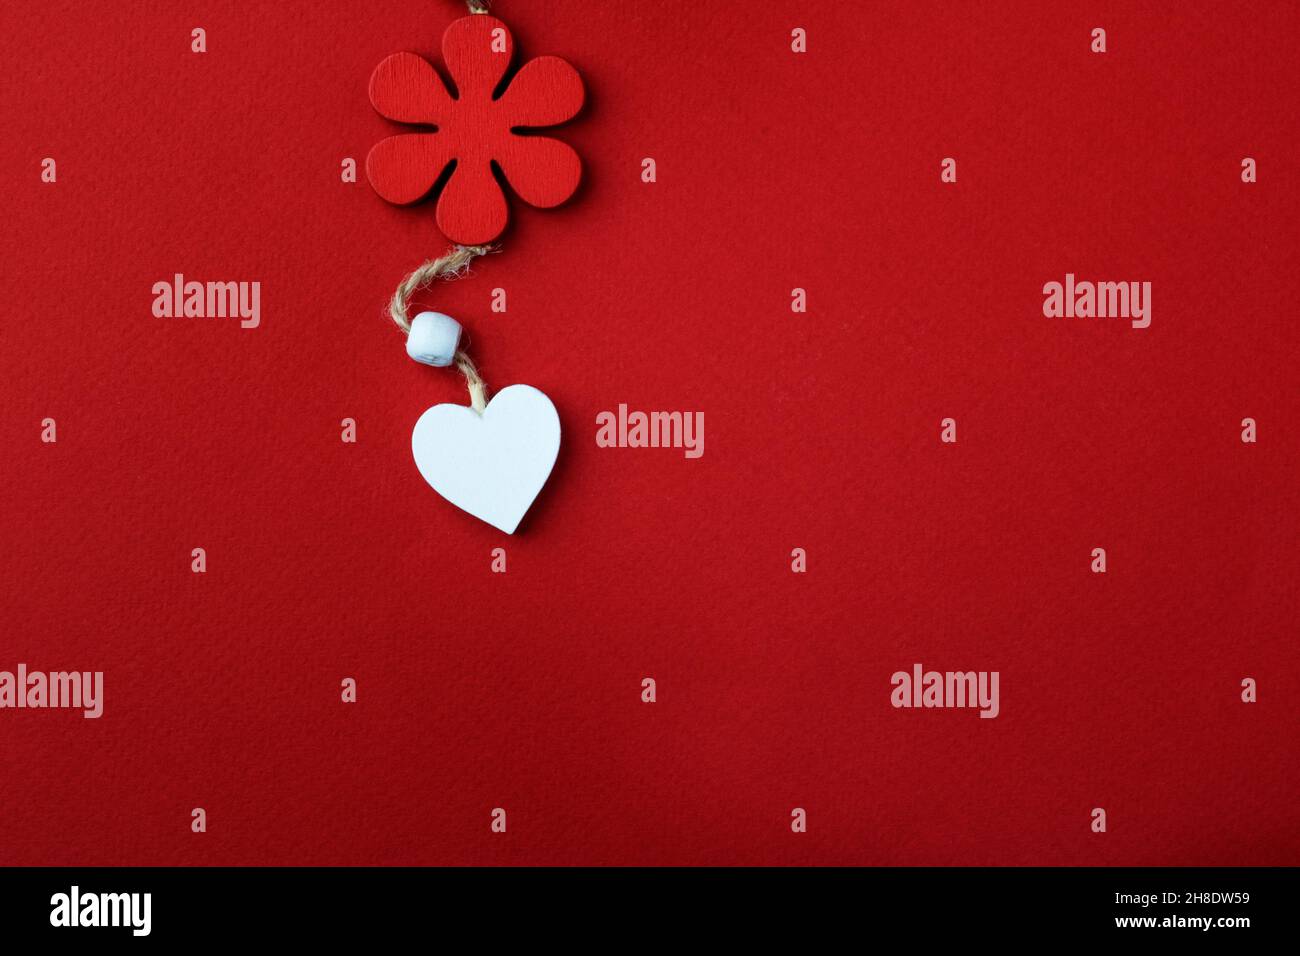 Composition background for Valentine's Day. A white heart made of wood hangs on a natural thread under a red flower, on a red background. Copy space Stock Photo